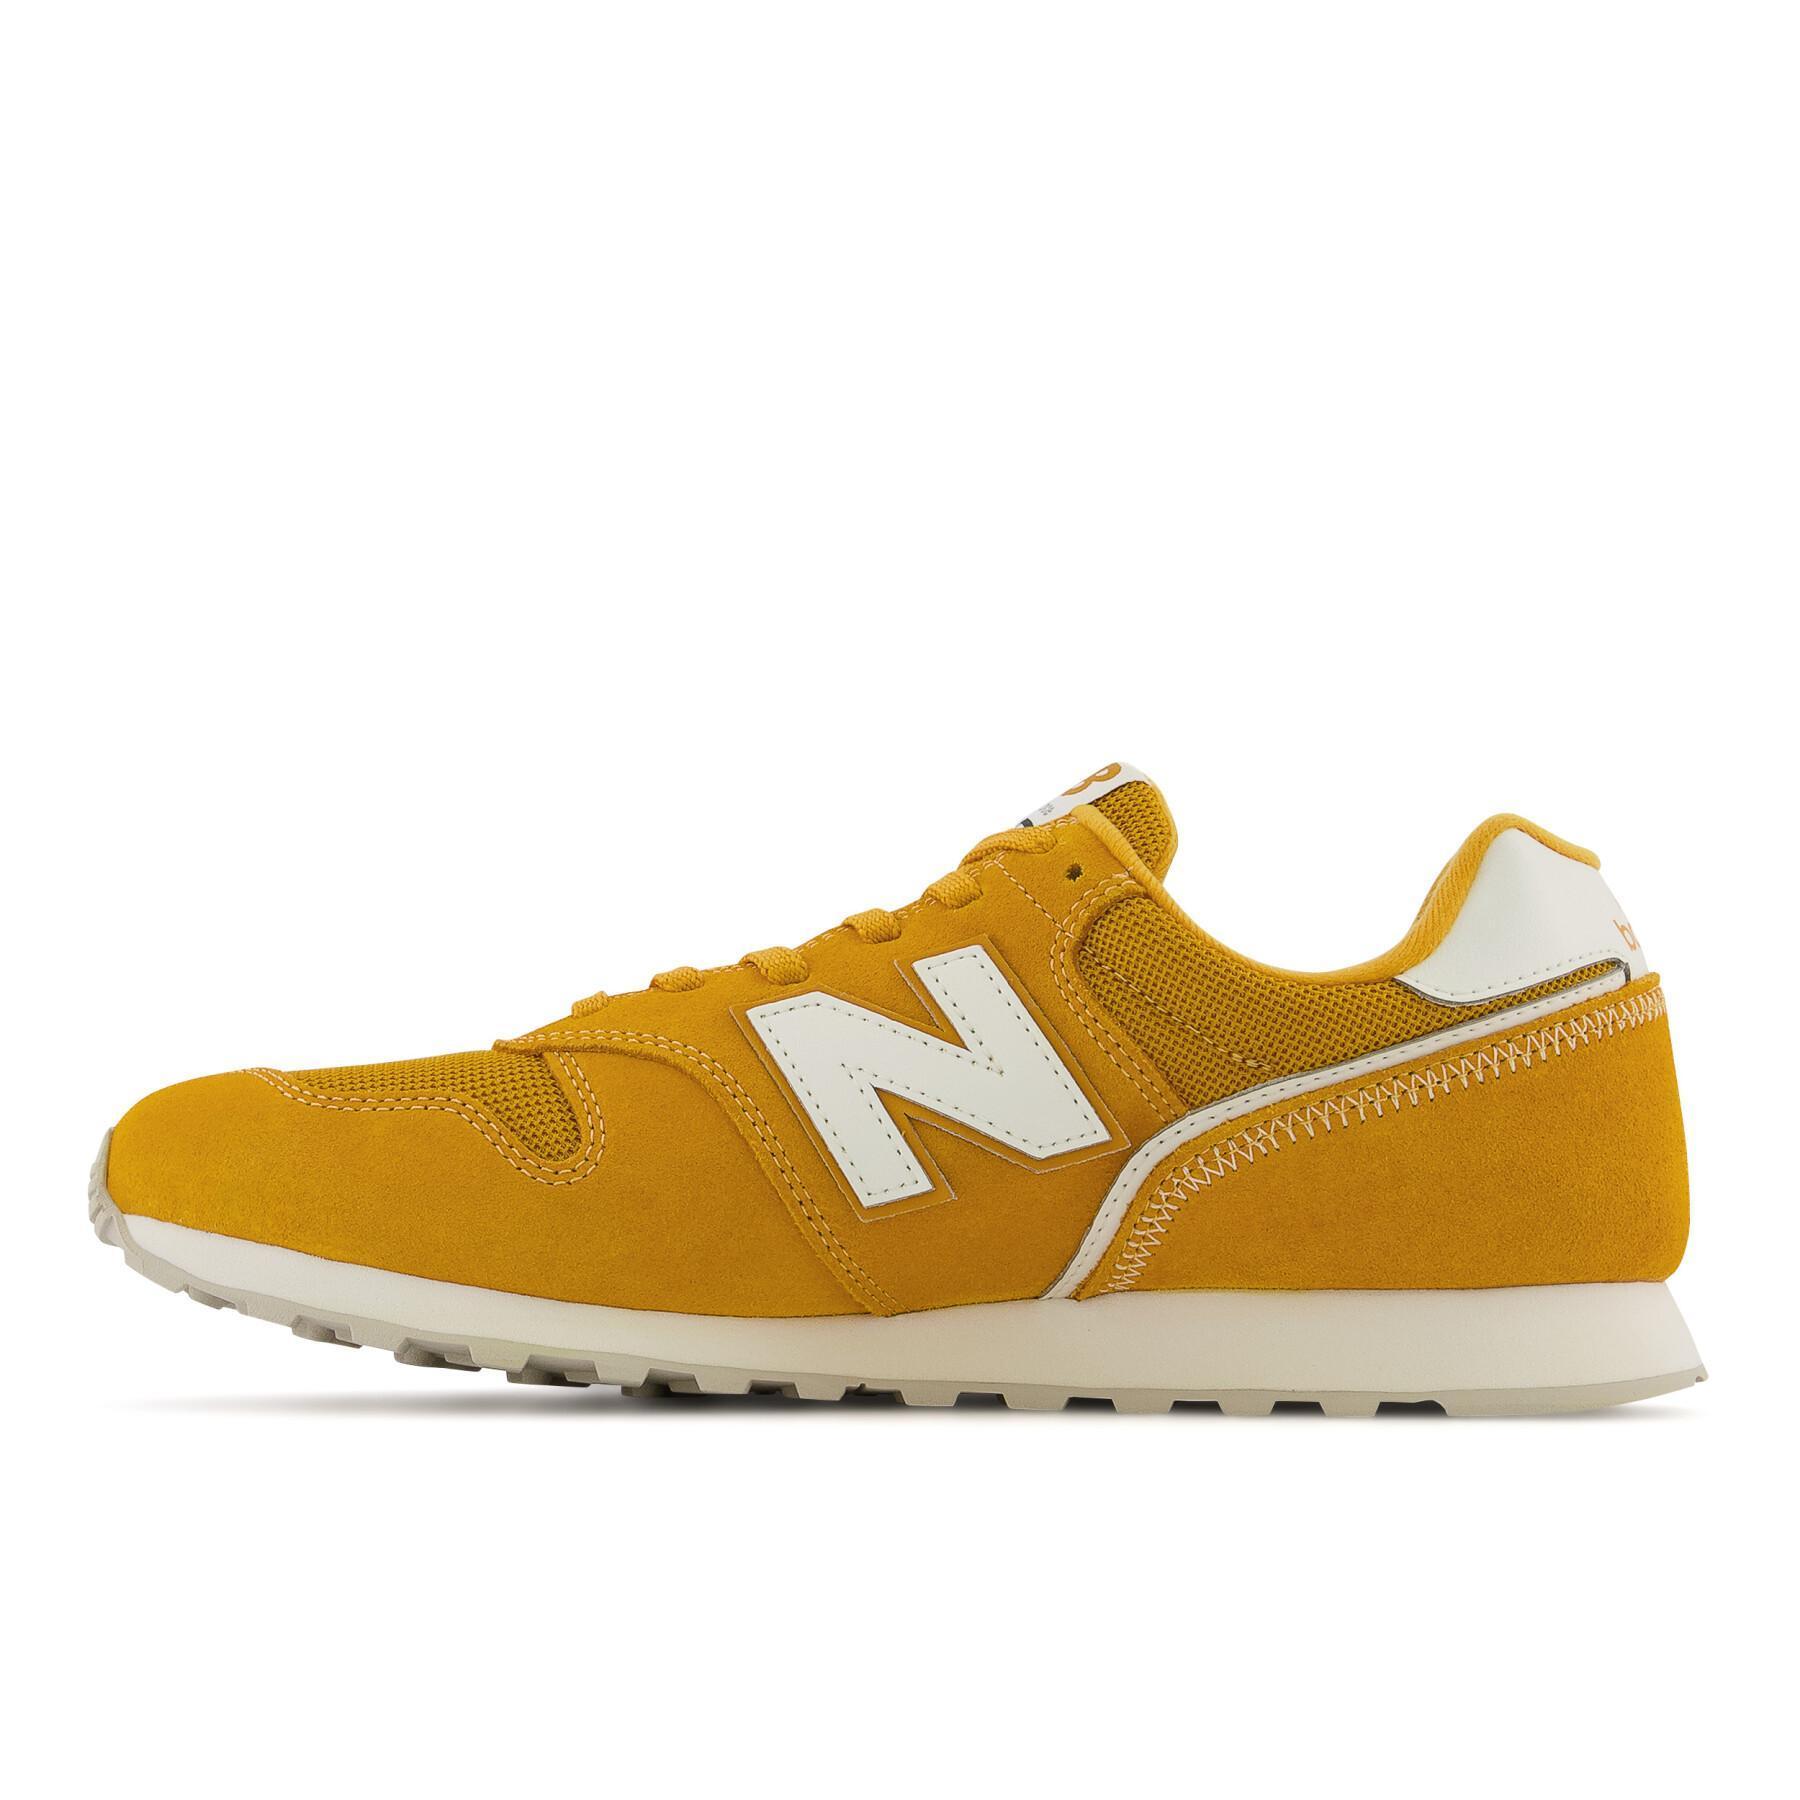 Sneakers New Balance 373v2